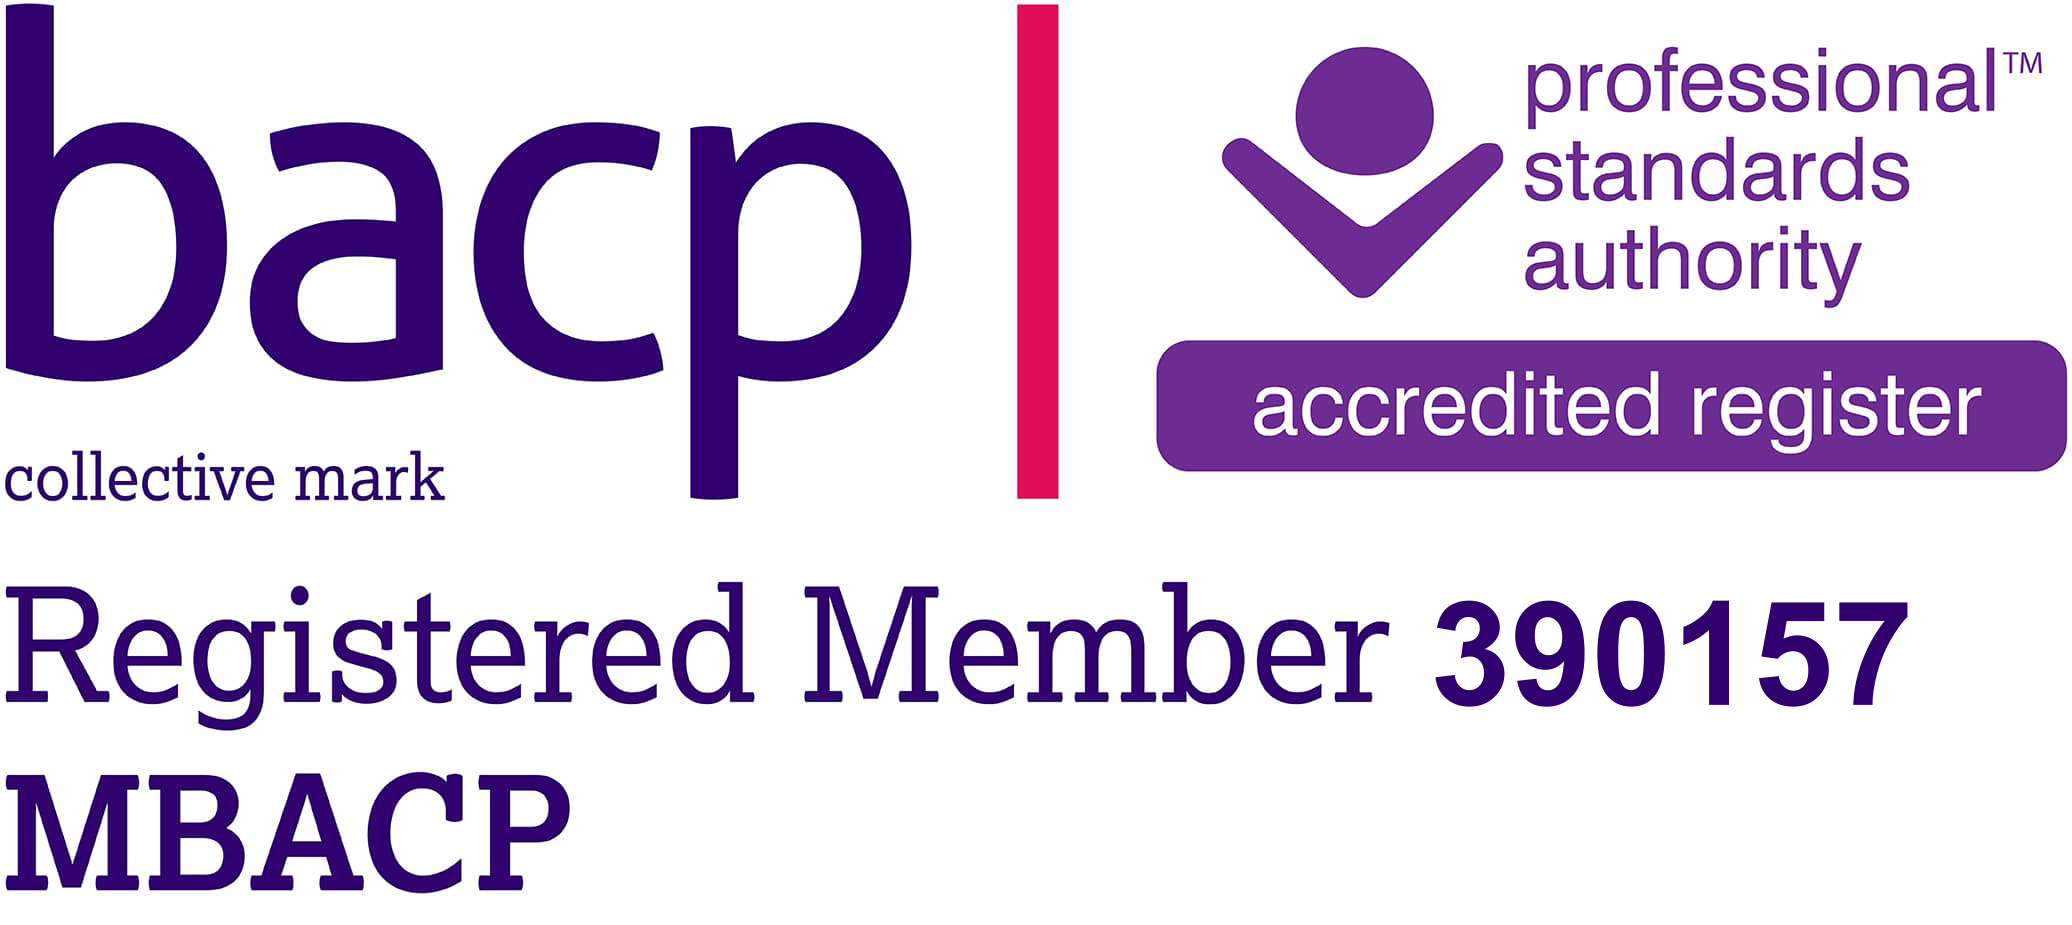 Registererd member badge for the British Association for Counselling and Psychotherapy